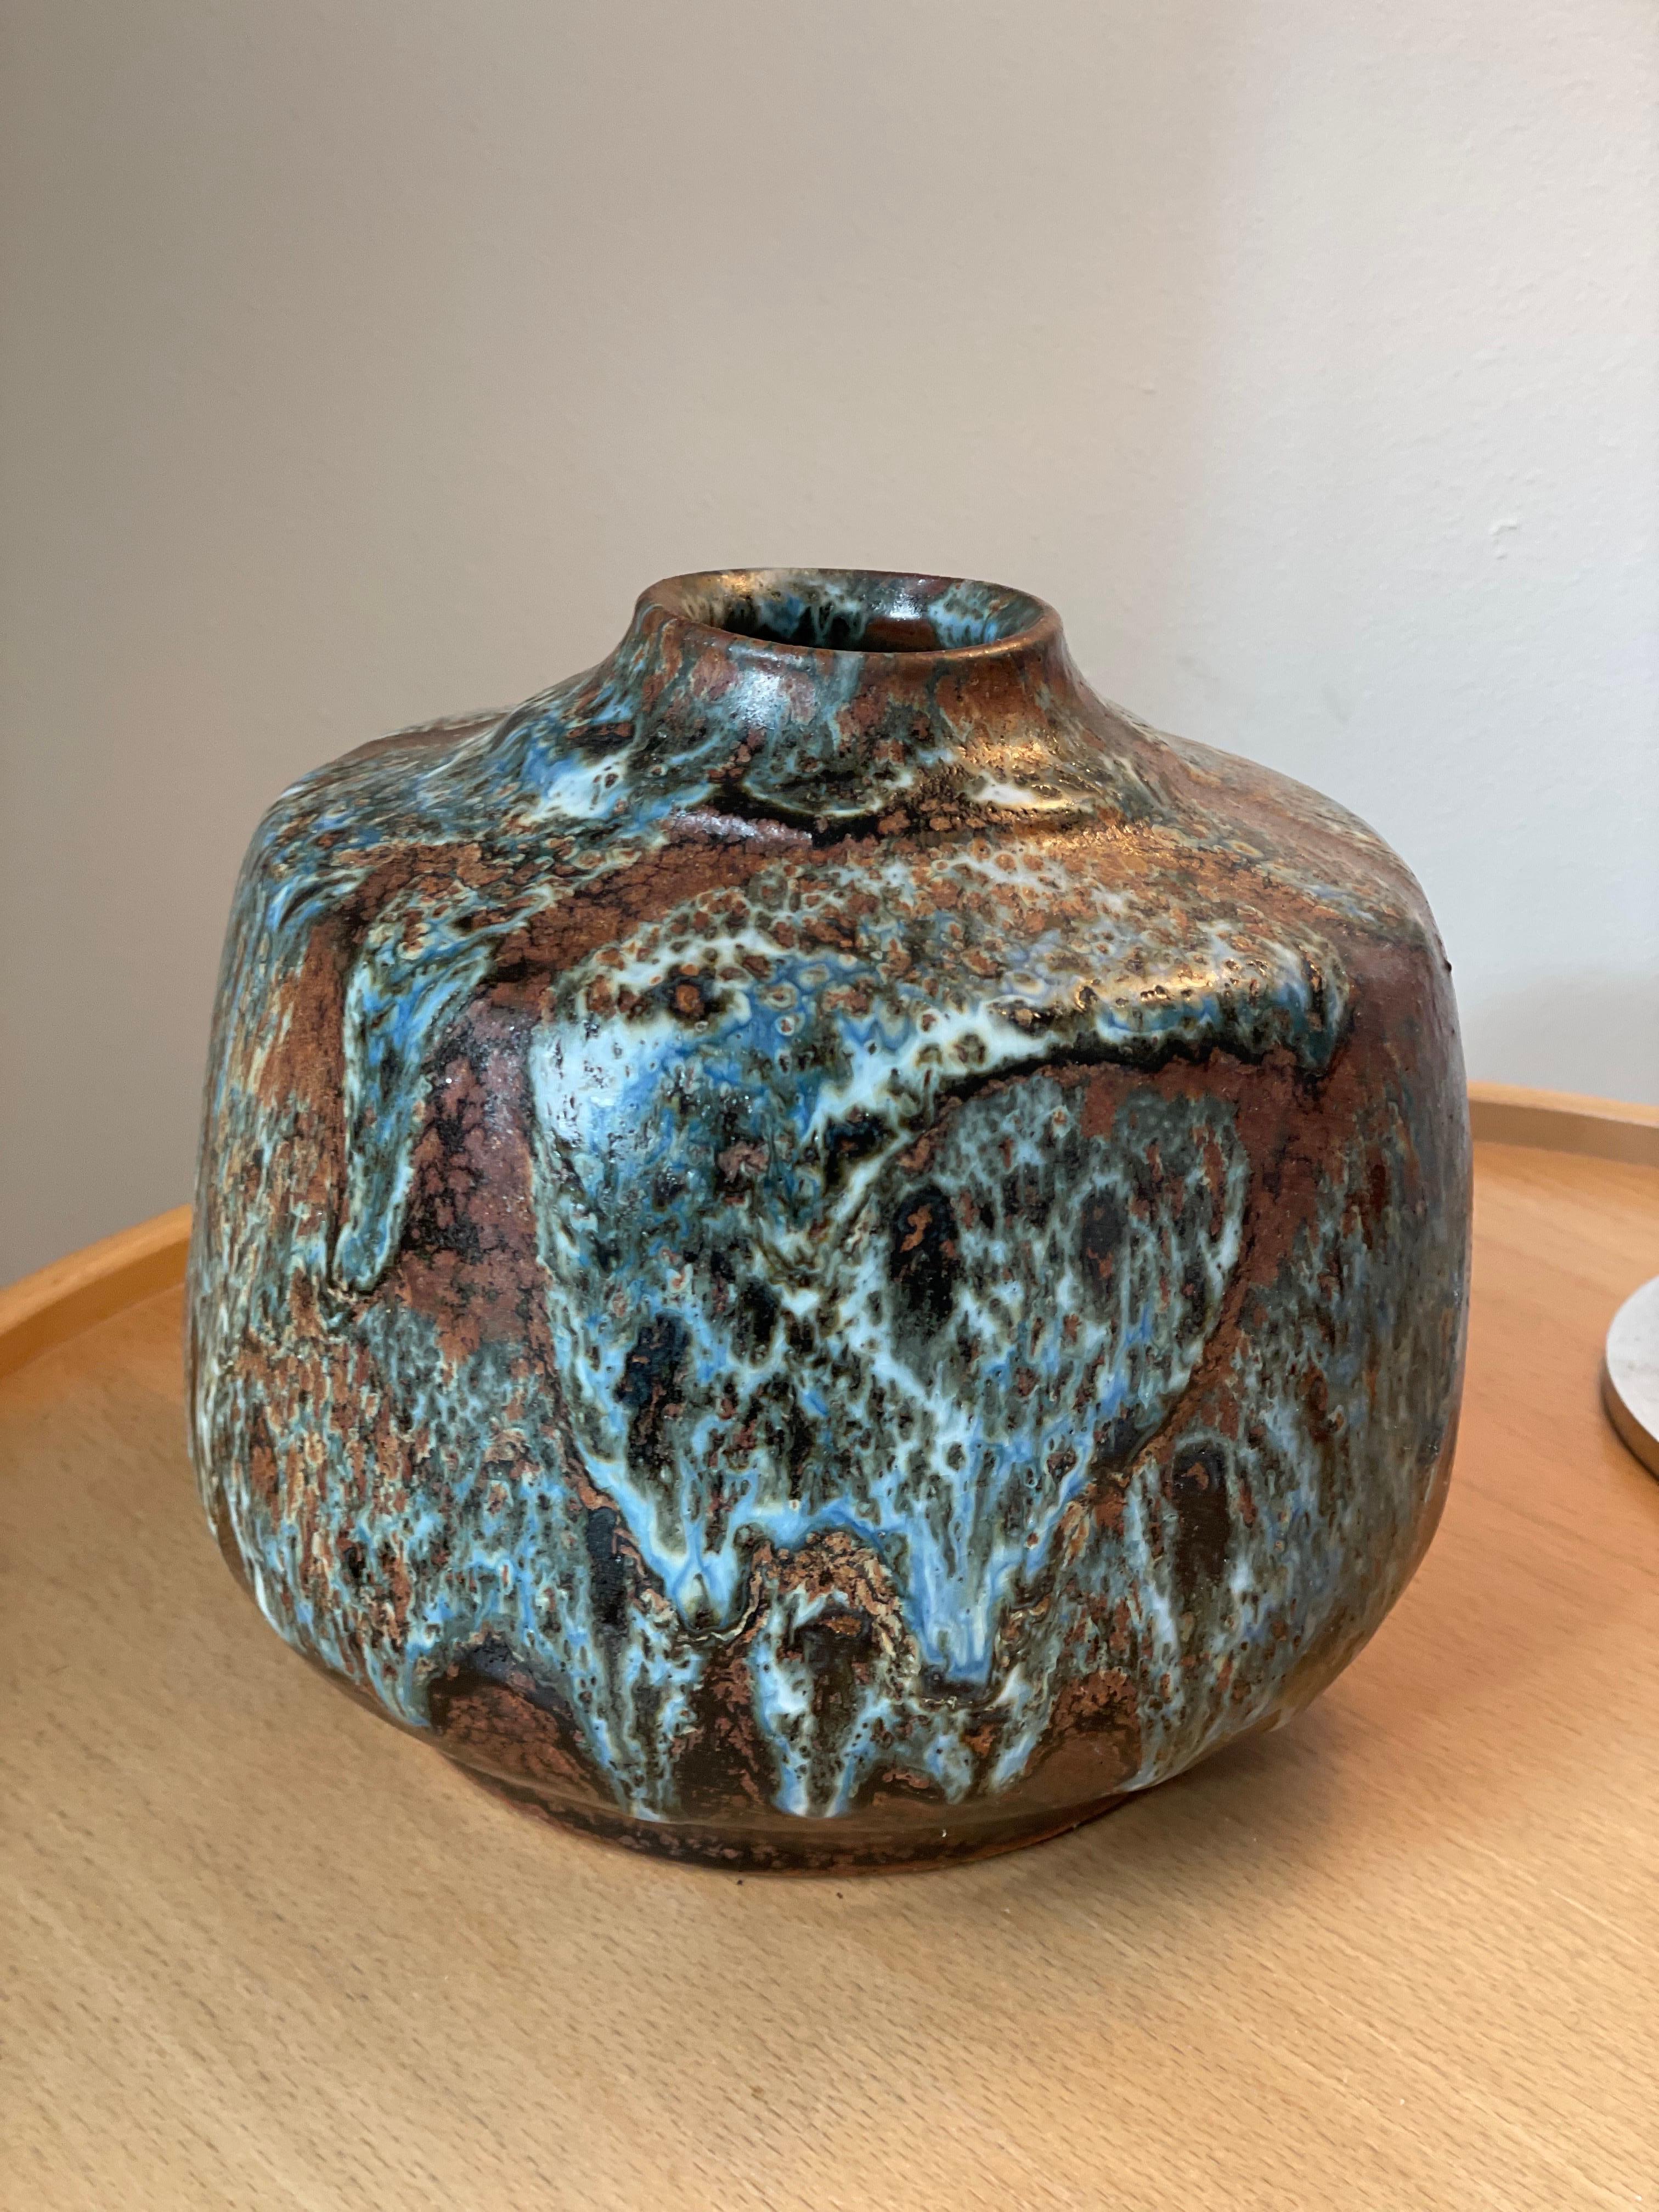 Erik Pløen was one of the leading figures in modern Norwegian ceramics. He had an exceptionally varied artistry where he constantly experimented with new forms and glazes. Pløen's work is primarily characterized by a great sculptural